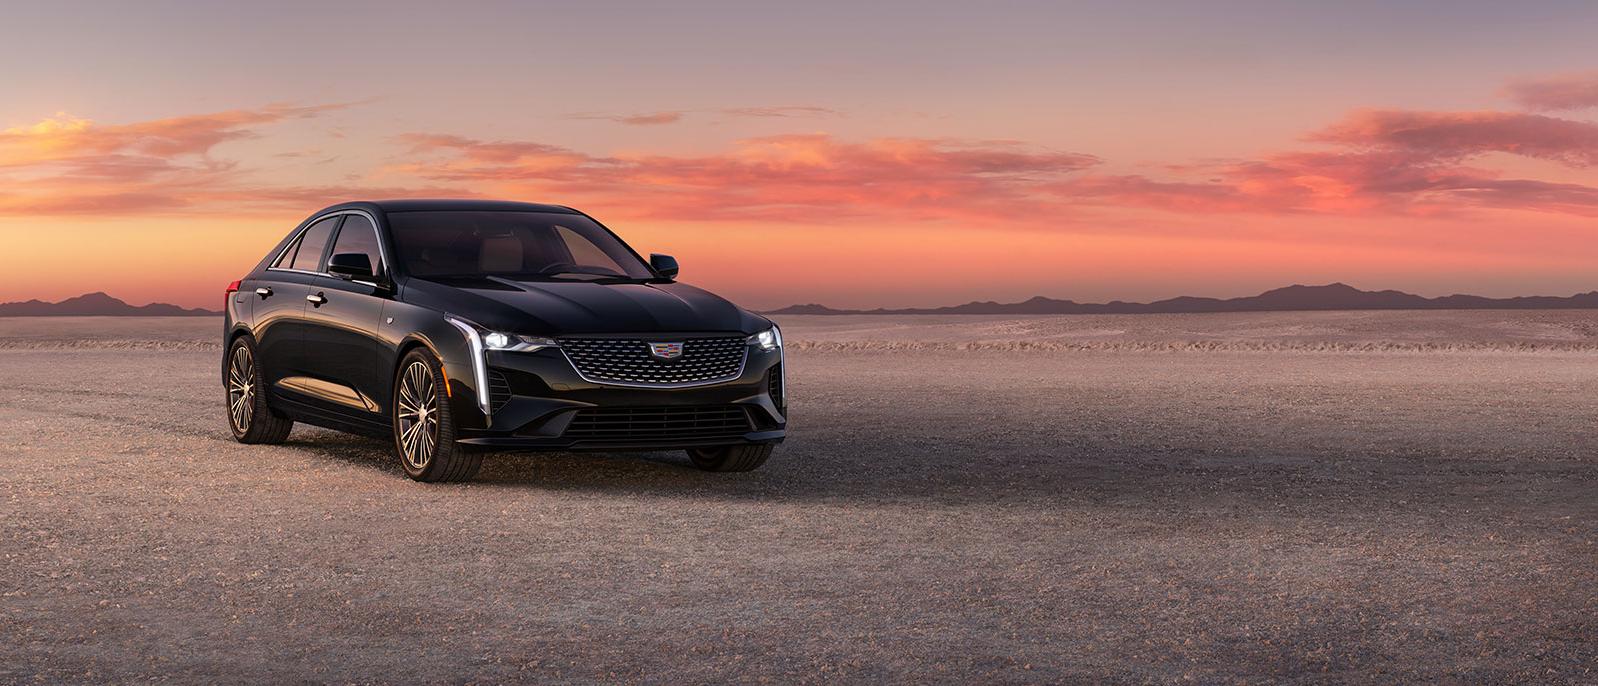 2023 Cadillac CT6 Black exterior with Sunset